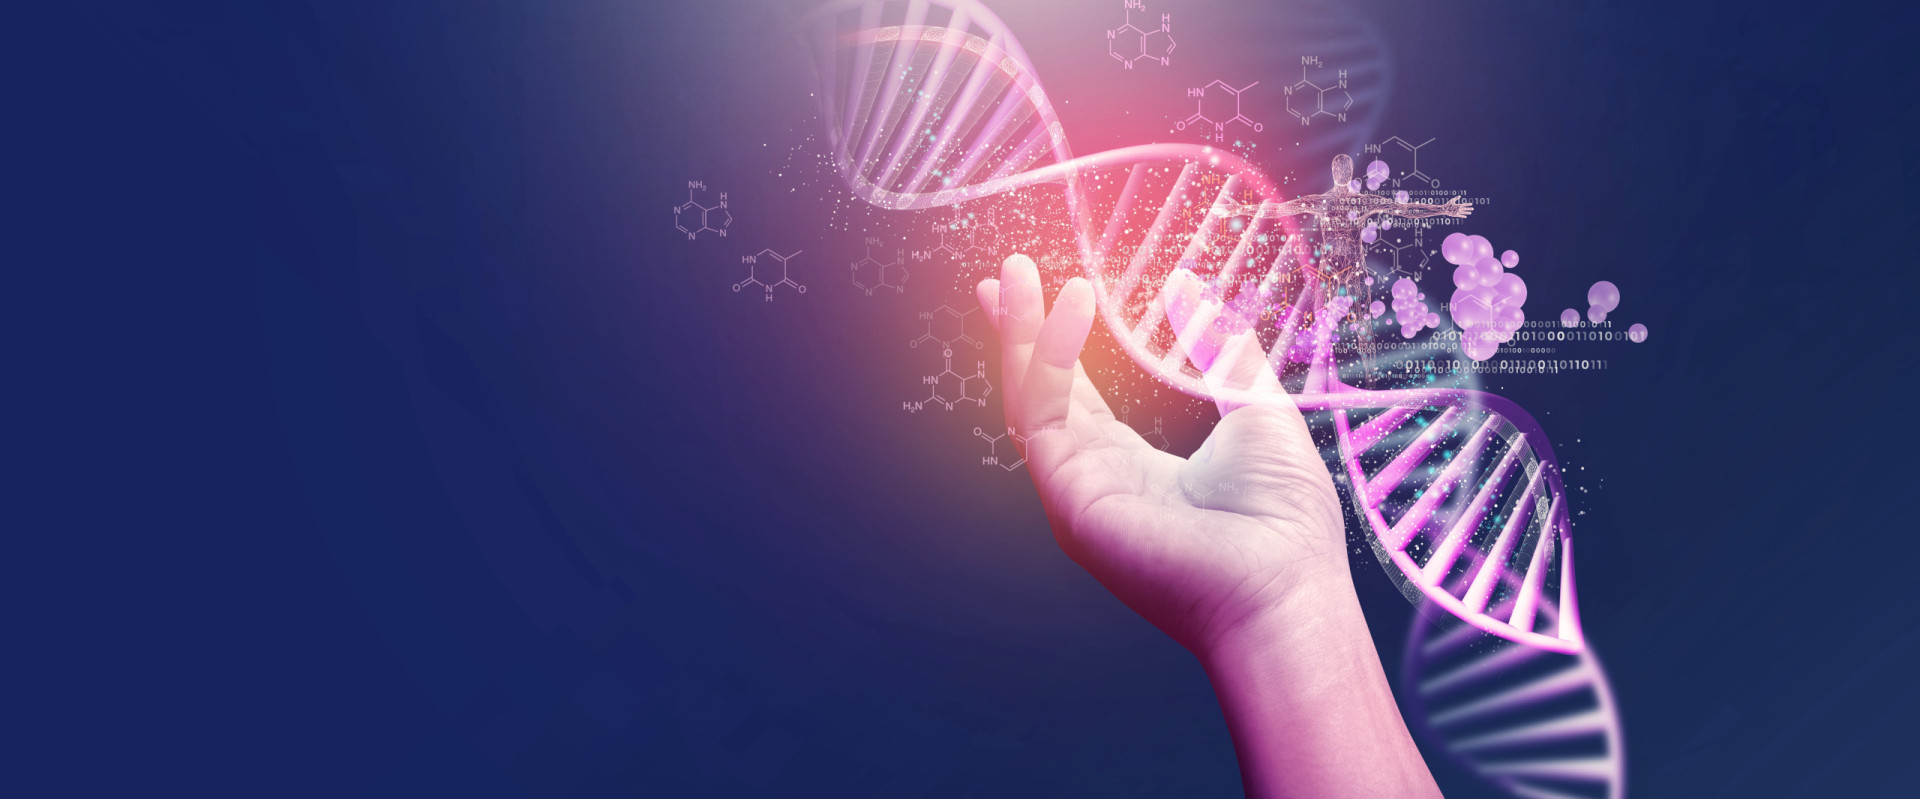 <p>Genomics analyzes and decodes an organism's complete set of DNA. It unveils genetic information, guiding advancements in personalized medicine, disease prevention, and understanding the fundamental building blocks of life.</p><p>You may also like:<a href="https://www.starsinsider.com/n/220053?utm_source=msn.com&utm_medium=display&utm_campaign=referral_description&utm_content=635781en-en"> Unprofessional stars involved in spats at work</a></p>